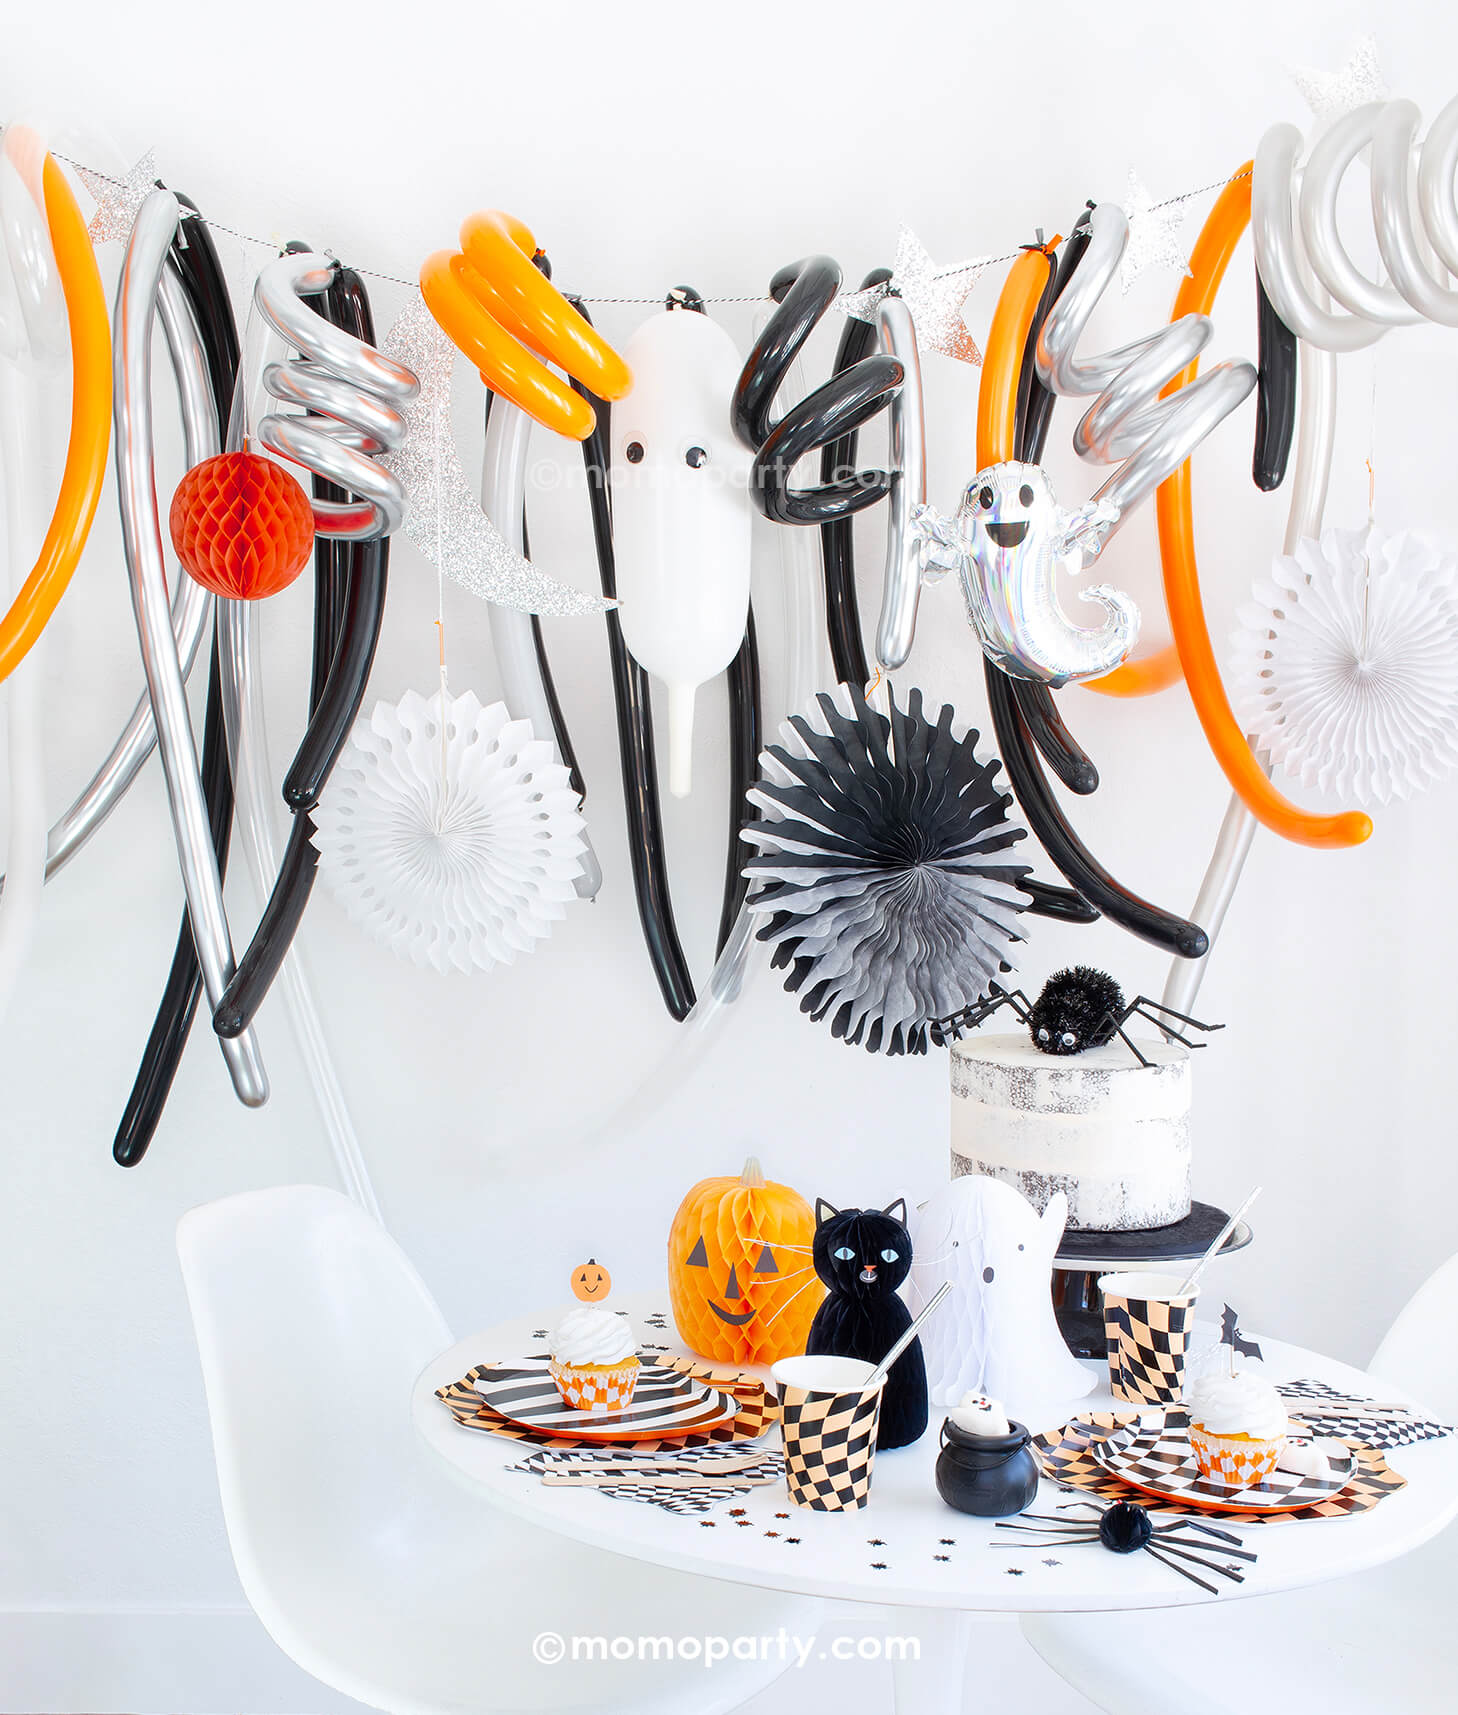 Halloween Party in a Box Kit - Spooky Fun Halloween Box by Momo Party.  Make a freaky fun Halloween celebration with this eerie Halloween party box featuring retro inspired Halloween goods in the classic Halloween colors of orange and black